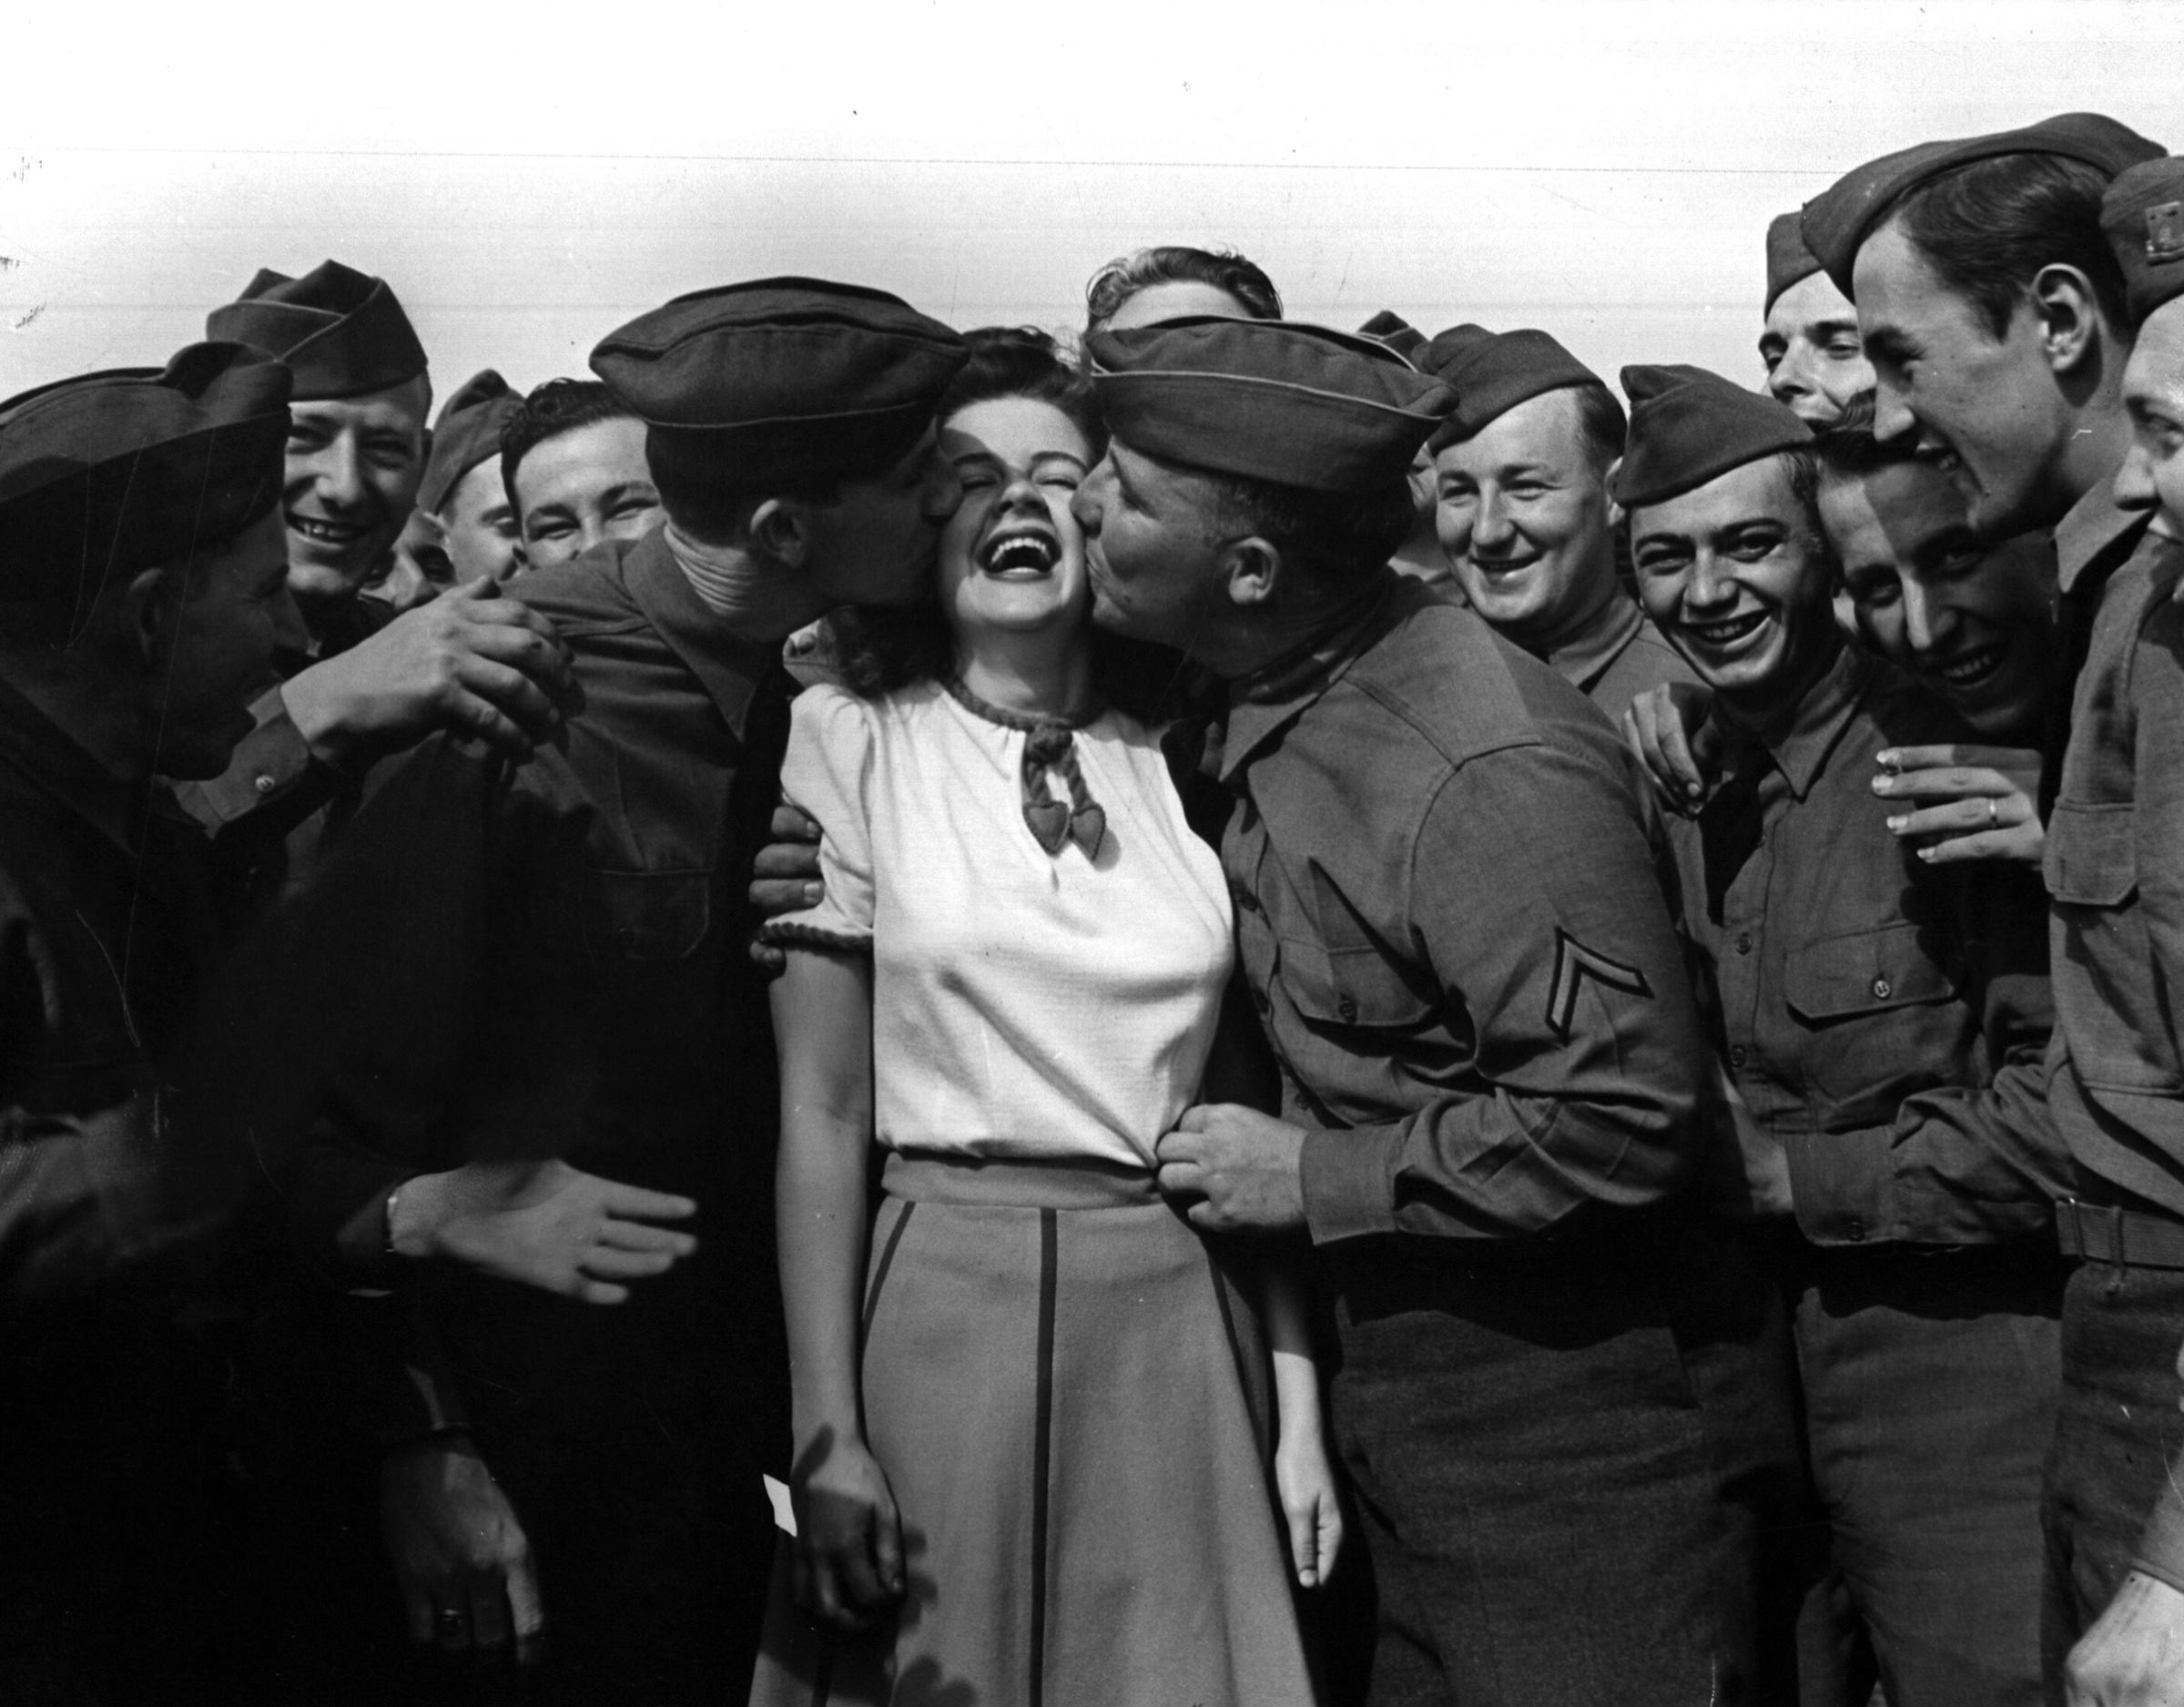 Actress Marilyn Hare being kiss by soldiers as repayment, 1942.